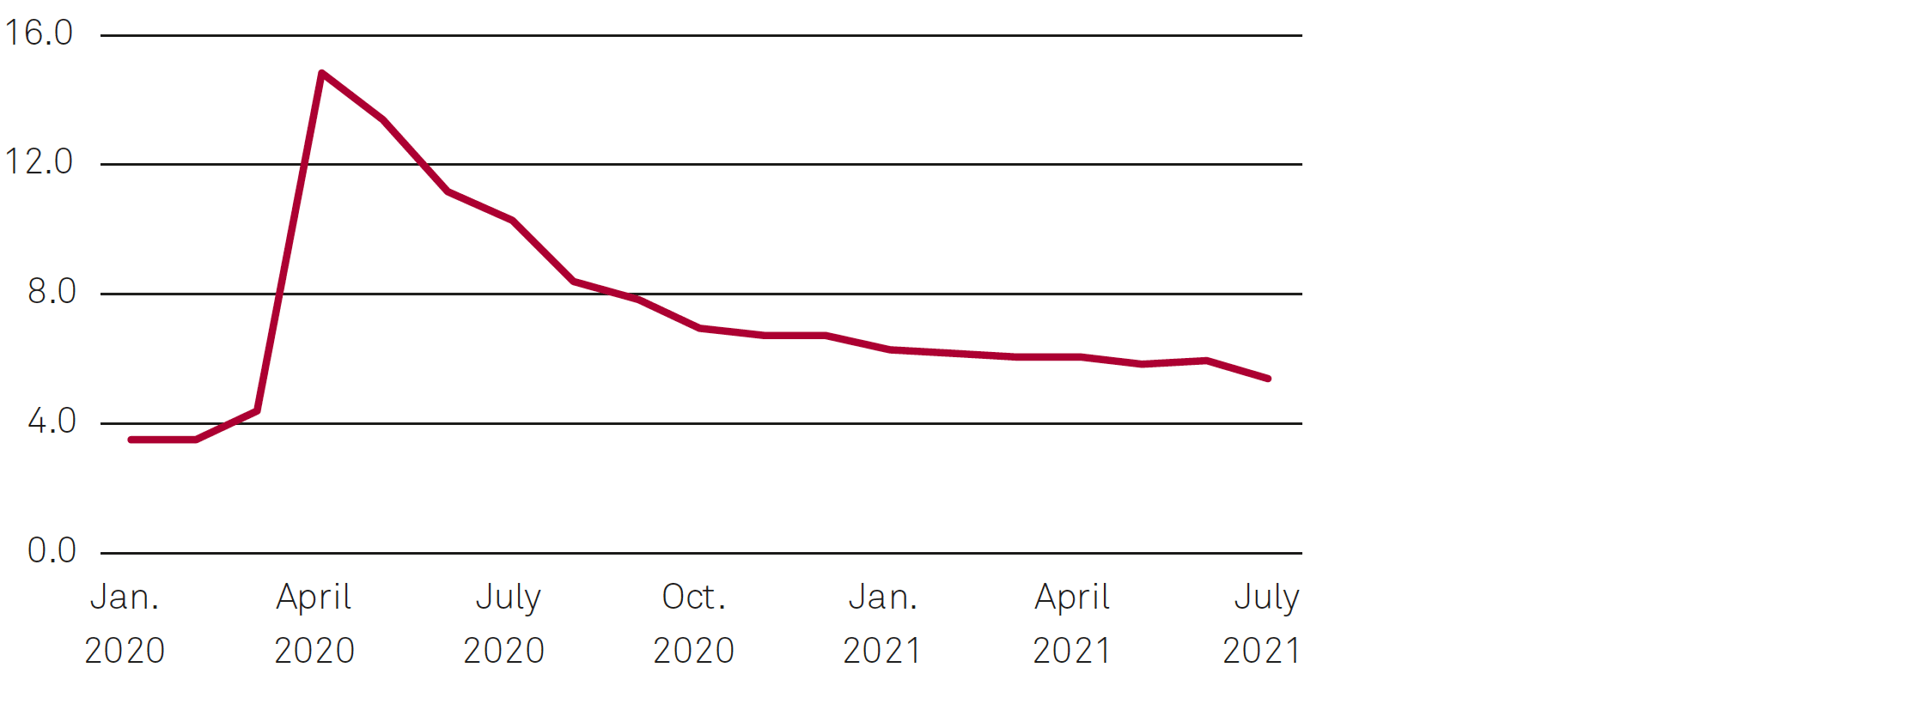 Fig. 1: US unemployment rate from January 2020 o July 2021